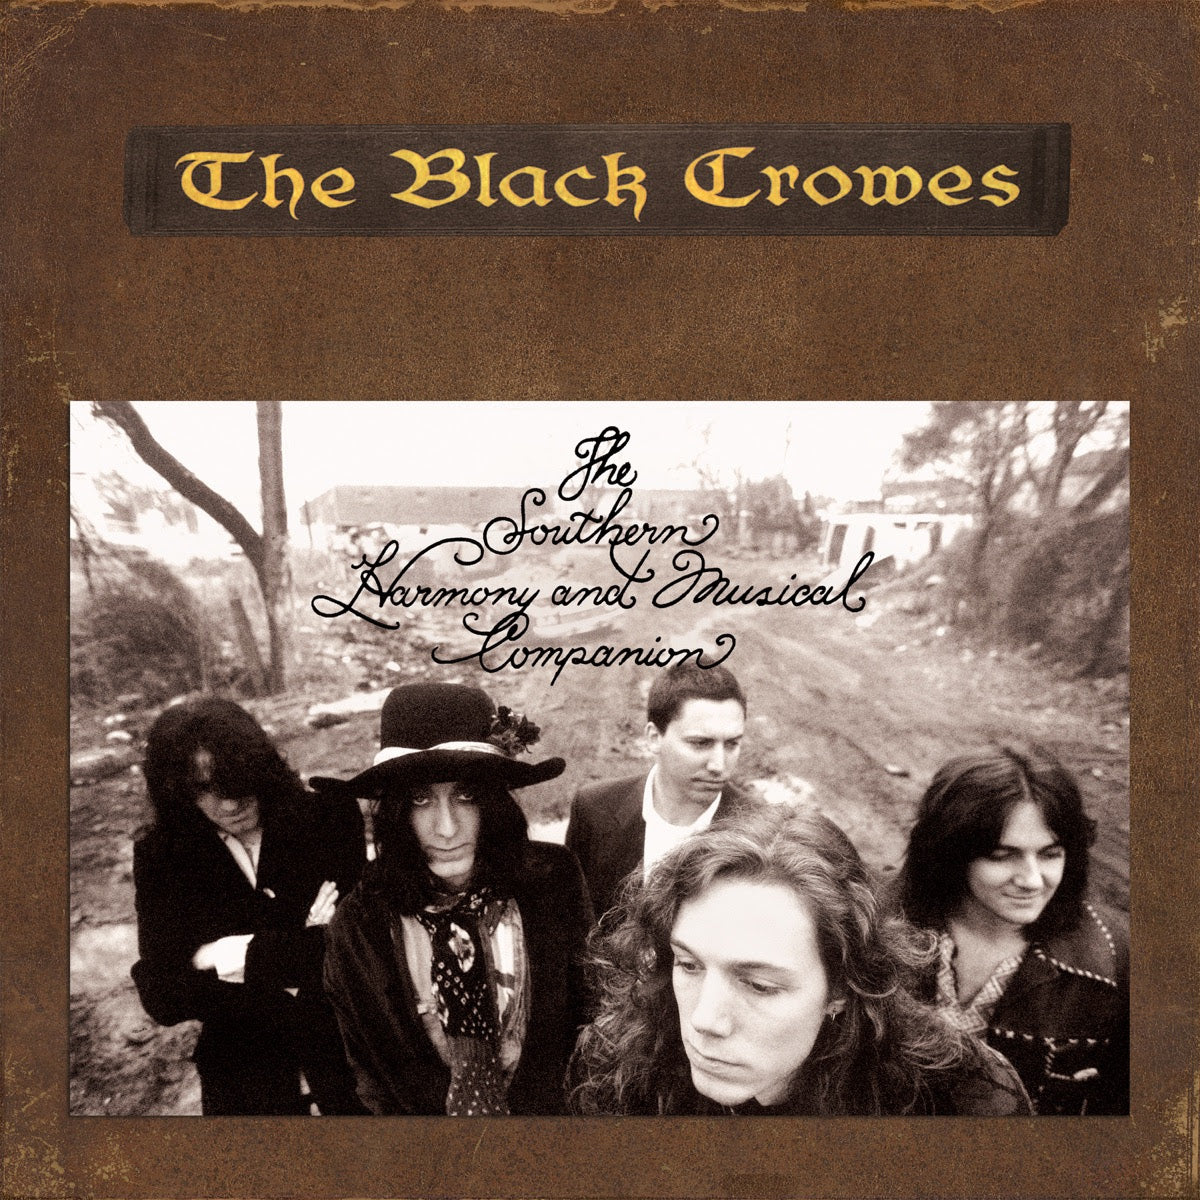 The Black Crowes - The Southern Harmony And Musical Companion | Buy the Vinyl LP from Flying Nun Records 